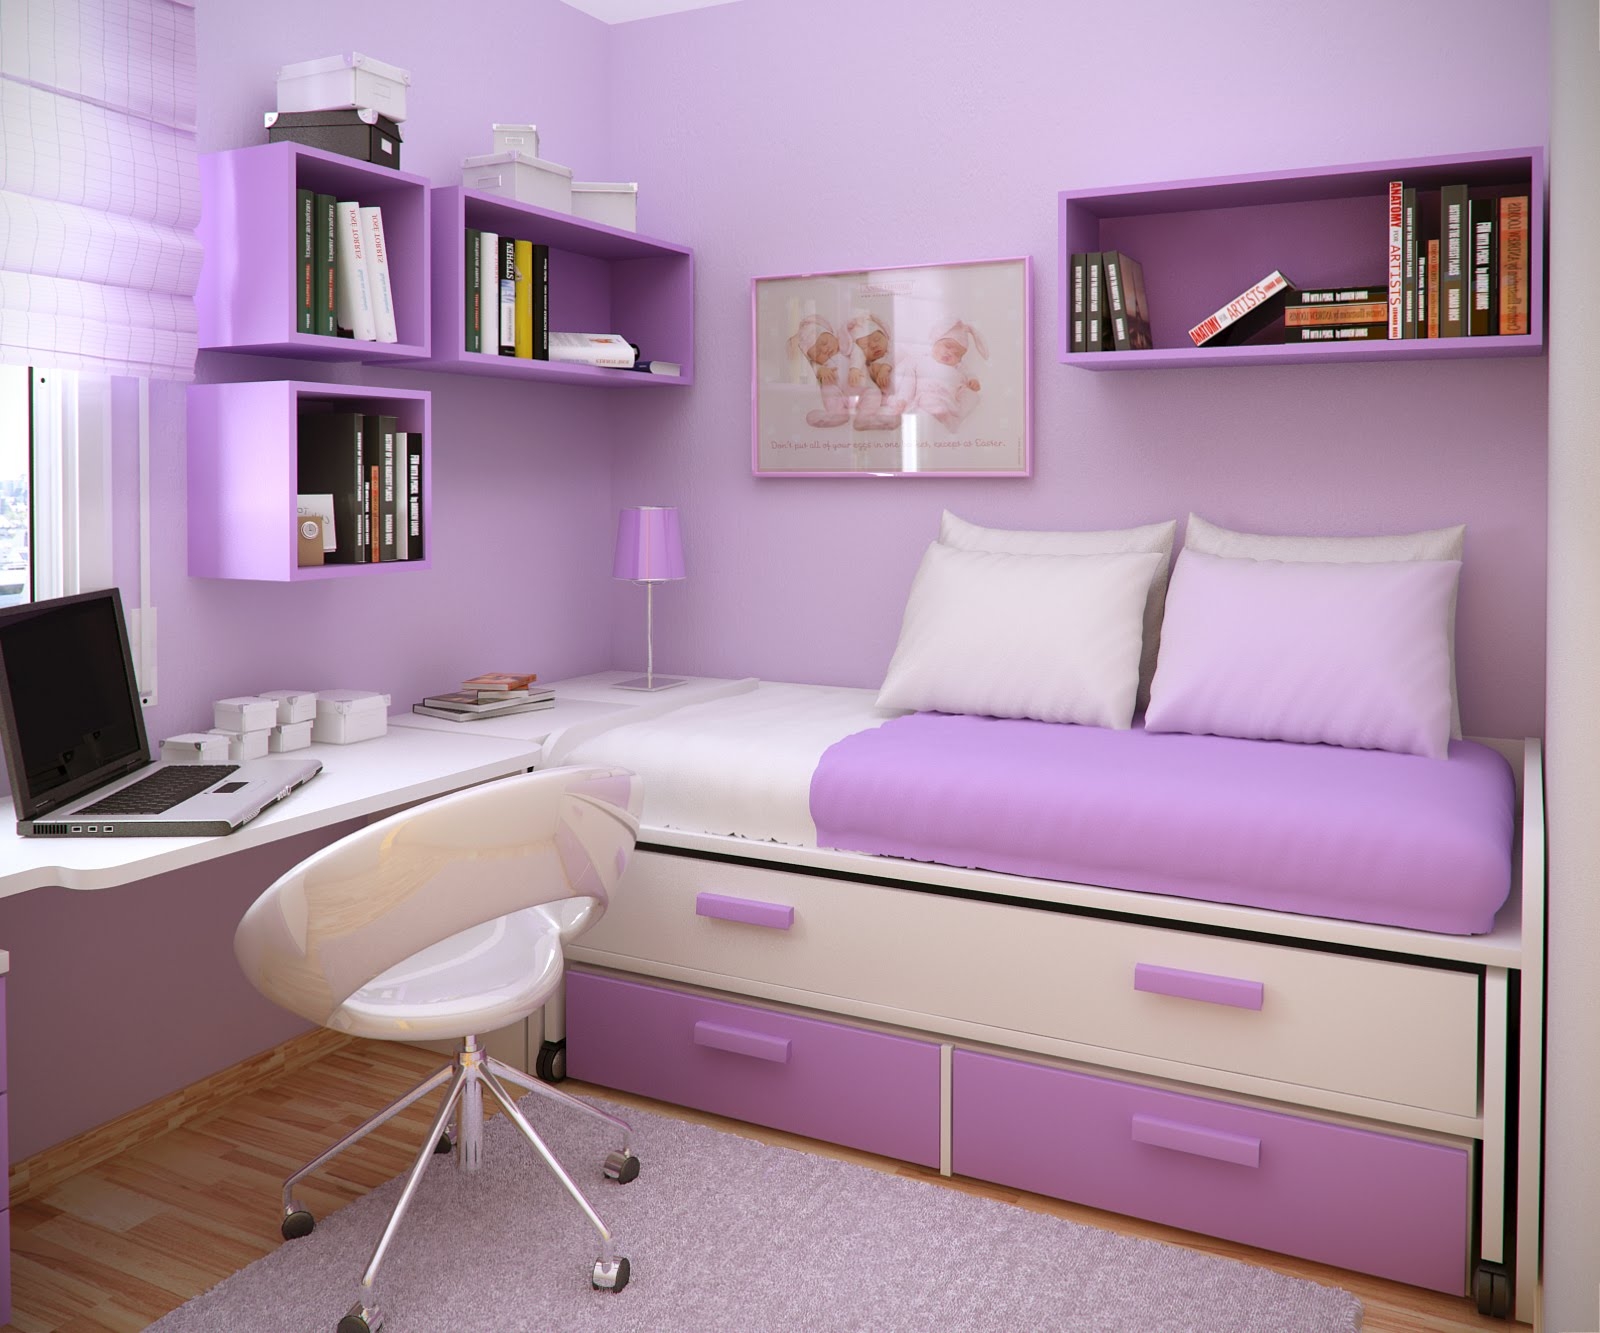 bedroom-interior-romantic-purple-wall-paint-best-wall-color-for-bedroom-design-ideas-with-stunning-white-purple-day-bed-and-beautiful-open-book-shelves-also-cool-white-study-table-plus-cozy-white-whe-